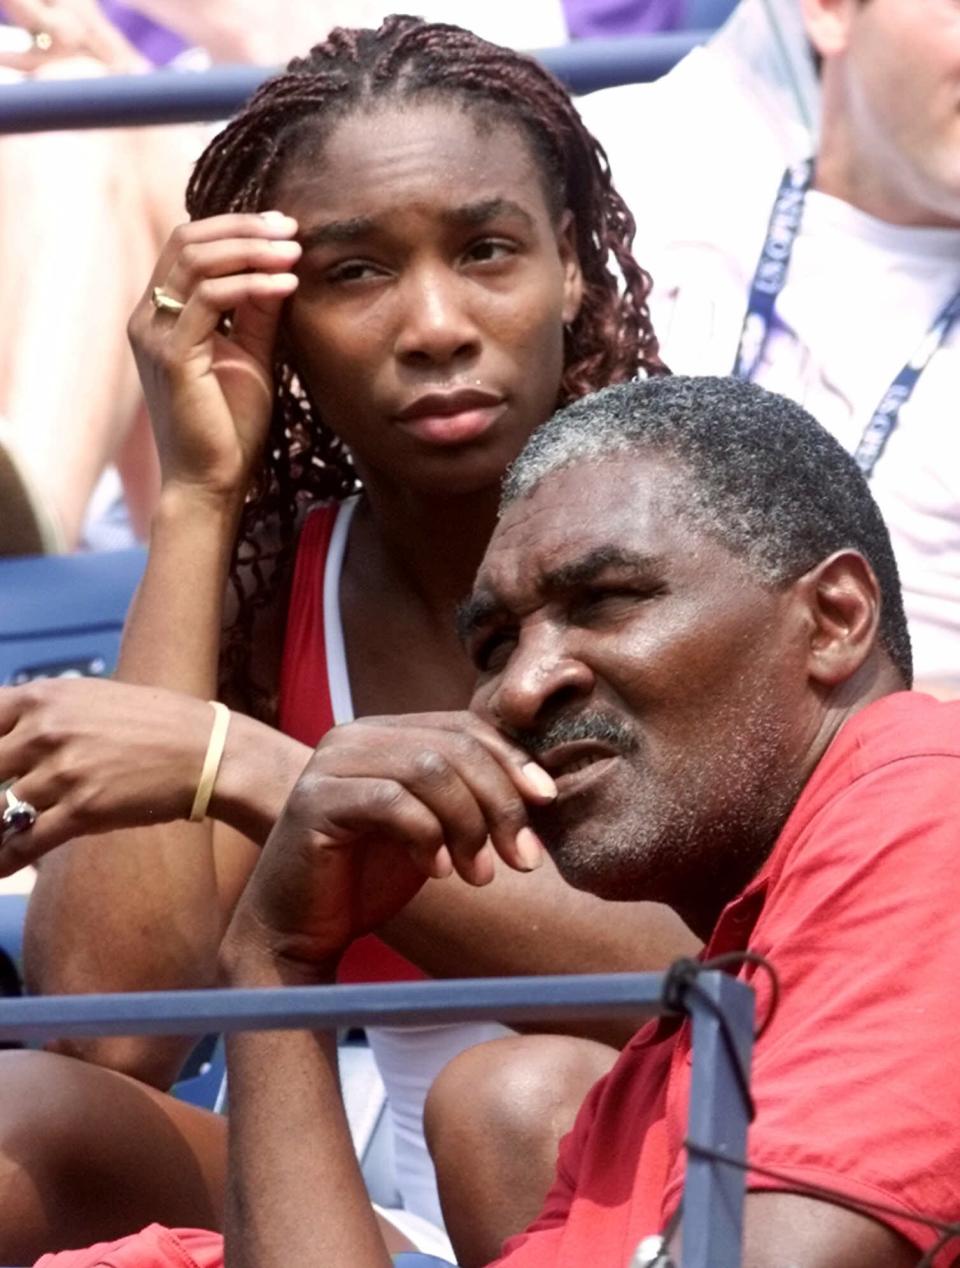 FILE - In this Sept. 4, 2000, file photo, Venus Williams watches her sister Serena play Australia's Jelena Dokic alongside her father and coach Richard Williams at the U.S. Open tennis tournament in New York. His new book, "Black and White: The Way I See It," comes out May 6. It goes into detail about how Indian Wells, as he writes, "disgraced America." (AP Photo/Suzanne Plunkett, File)